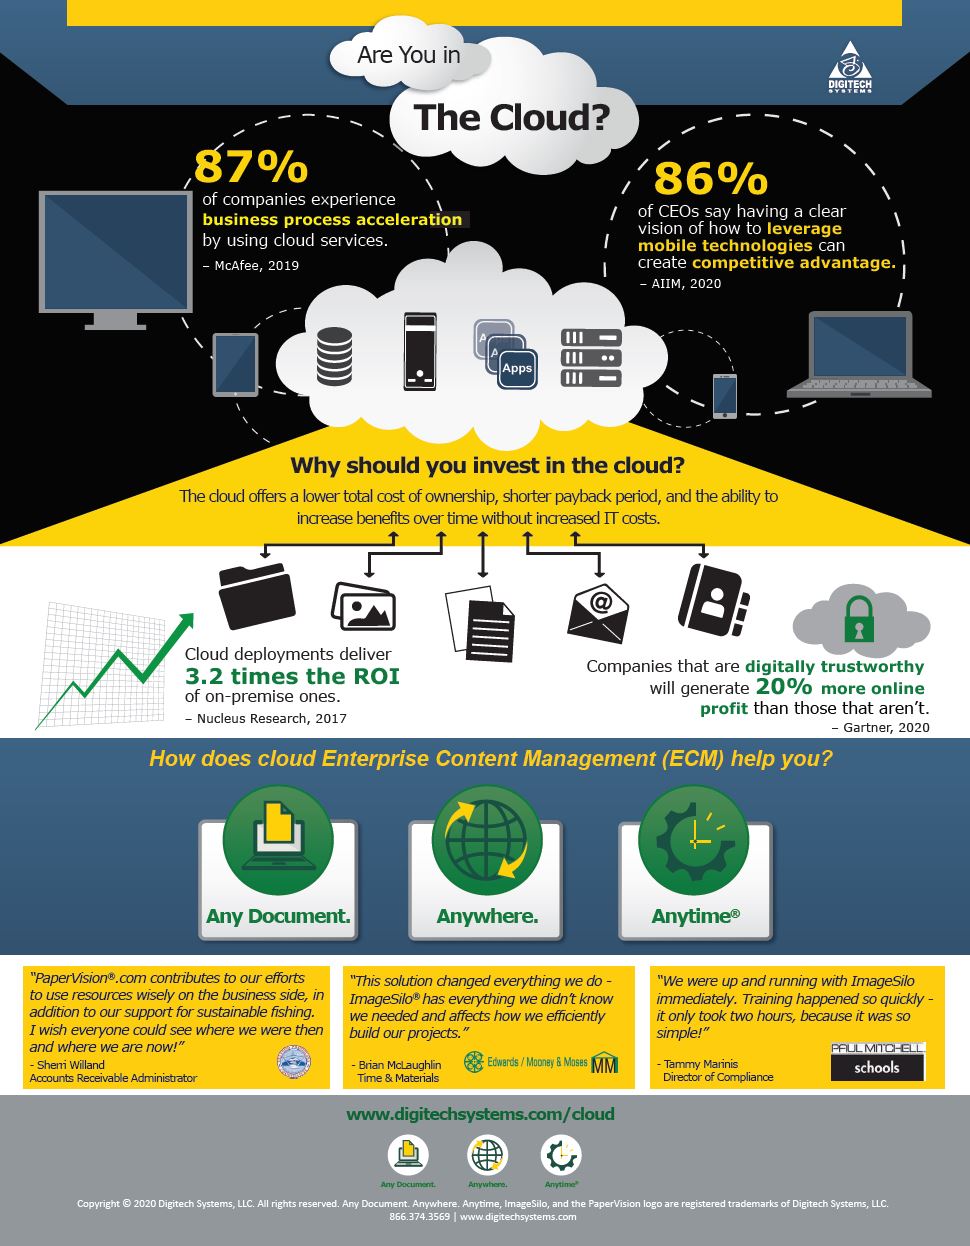 Cloud Computing: The Rise of the Public, Private, and Hybrid Cloud (Infographic)